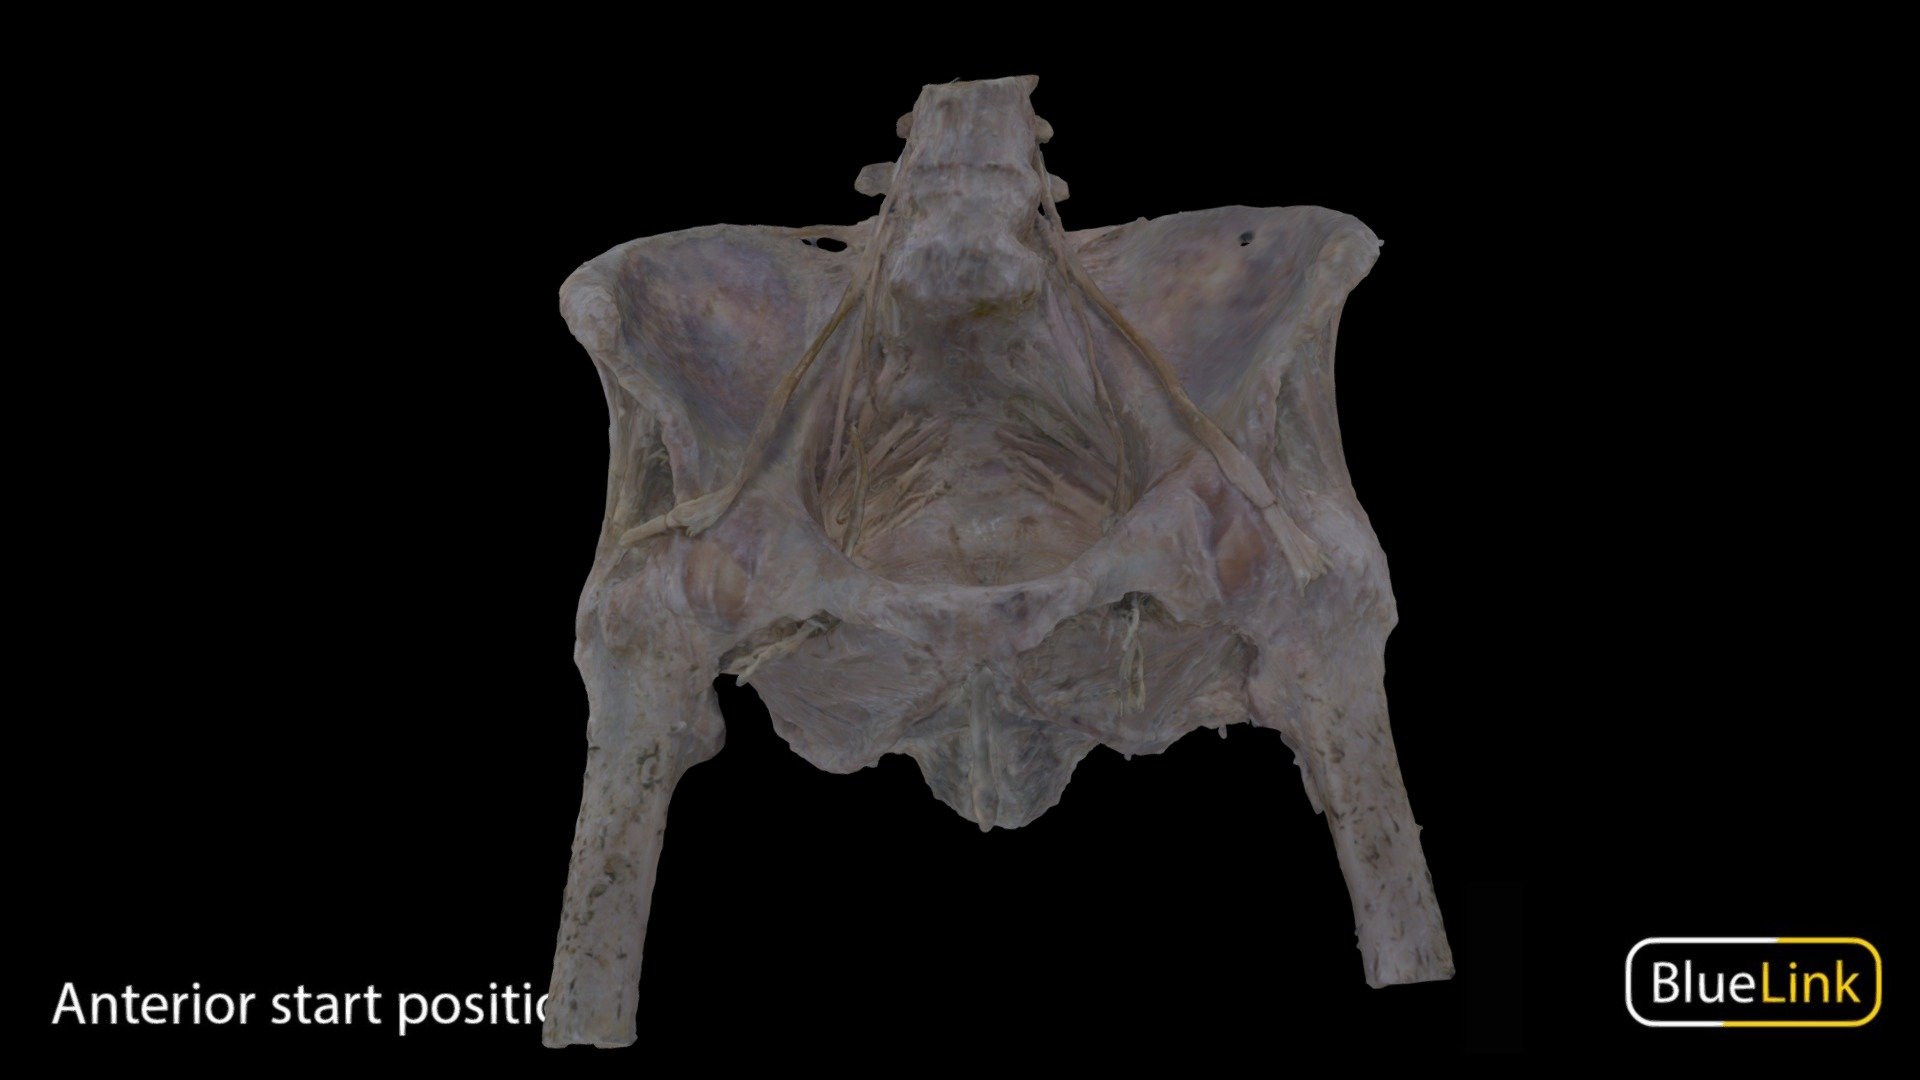 Human pelvis - female
Depicts: Piriformis m., sciatic n., pudendal neurovasculaure, isschioanal fossa, pelvic diaphragm, urogential hiatus, erectile tissue
Captured with: EinScan Pro
Captured by: Will Gribbin
Edited by: Cristina Prall
University of Michigan
30466-P01 - Female Pelvis - 3D model by Bluelink Anatomy - University of Michigan (@bluelinkanatomy) 3d model